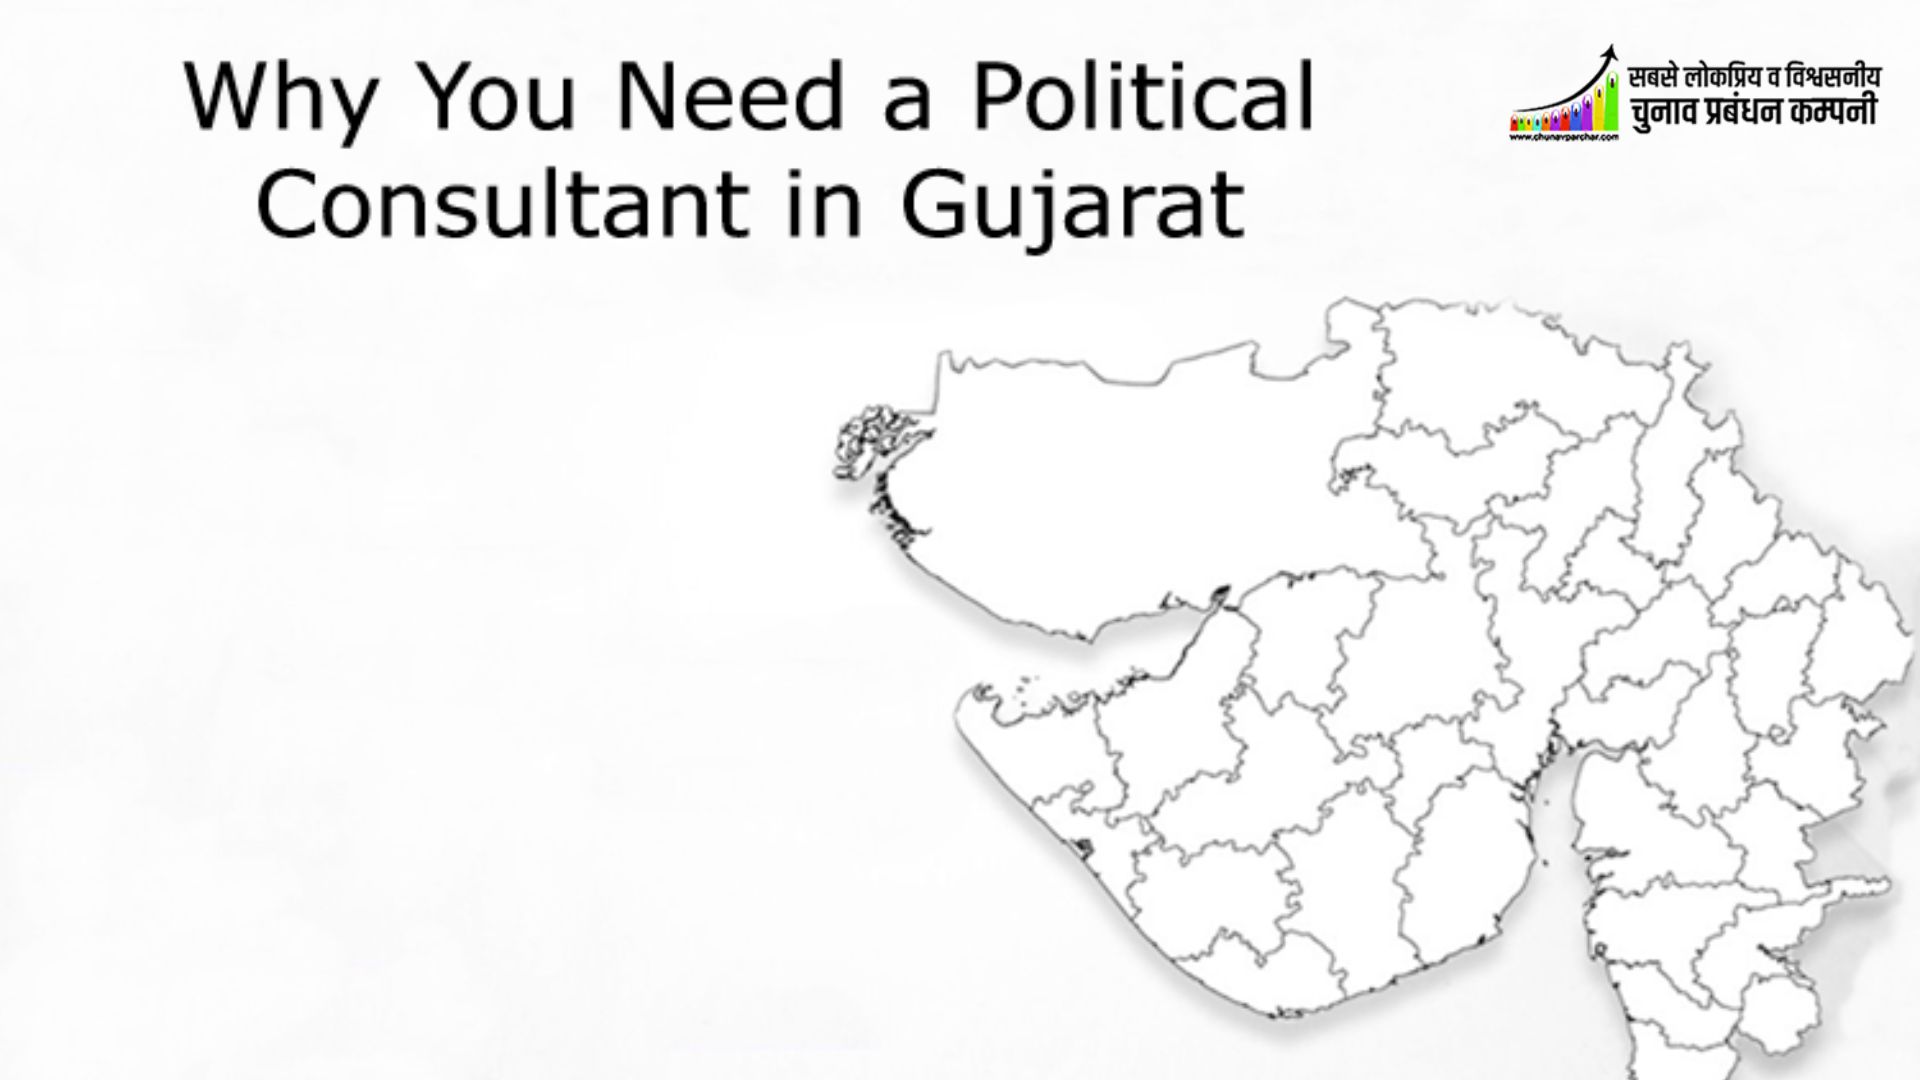 Why You Need a Political Consultant in Gujarat